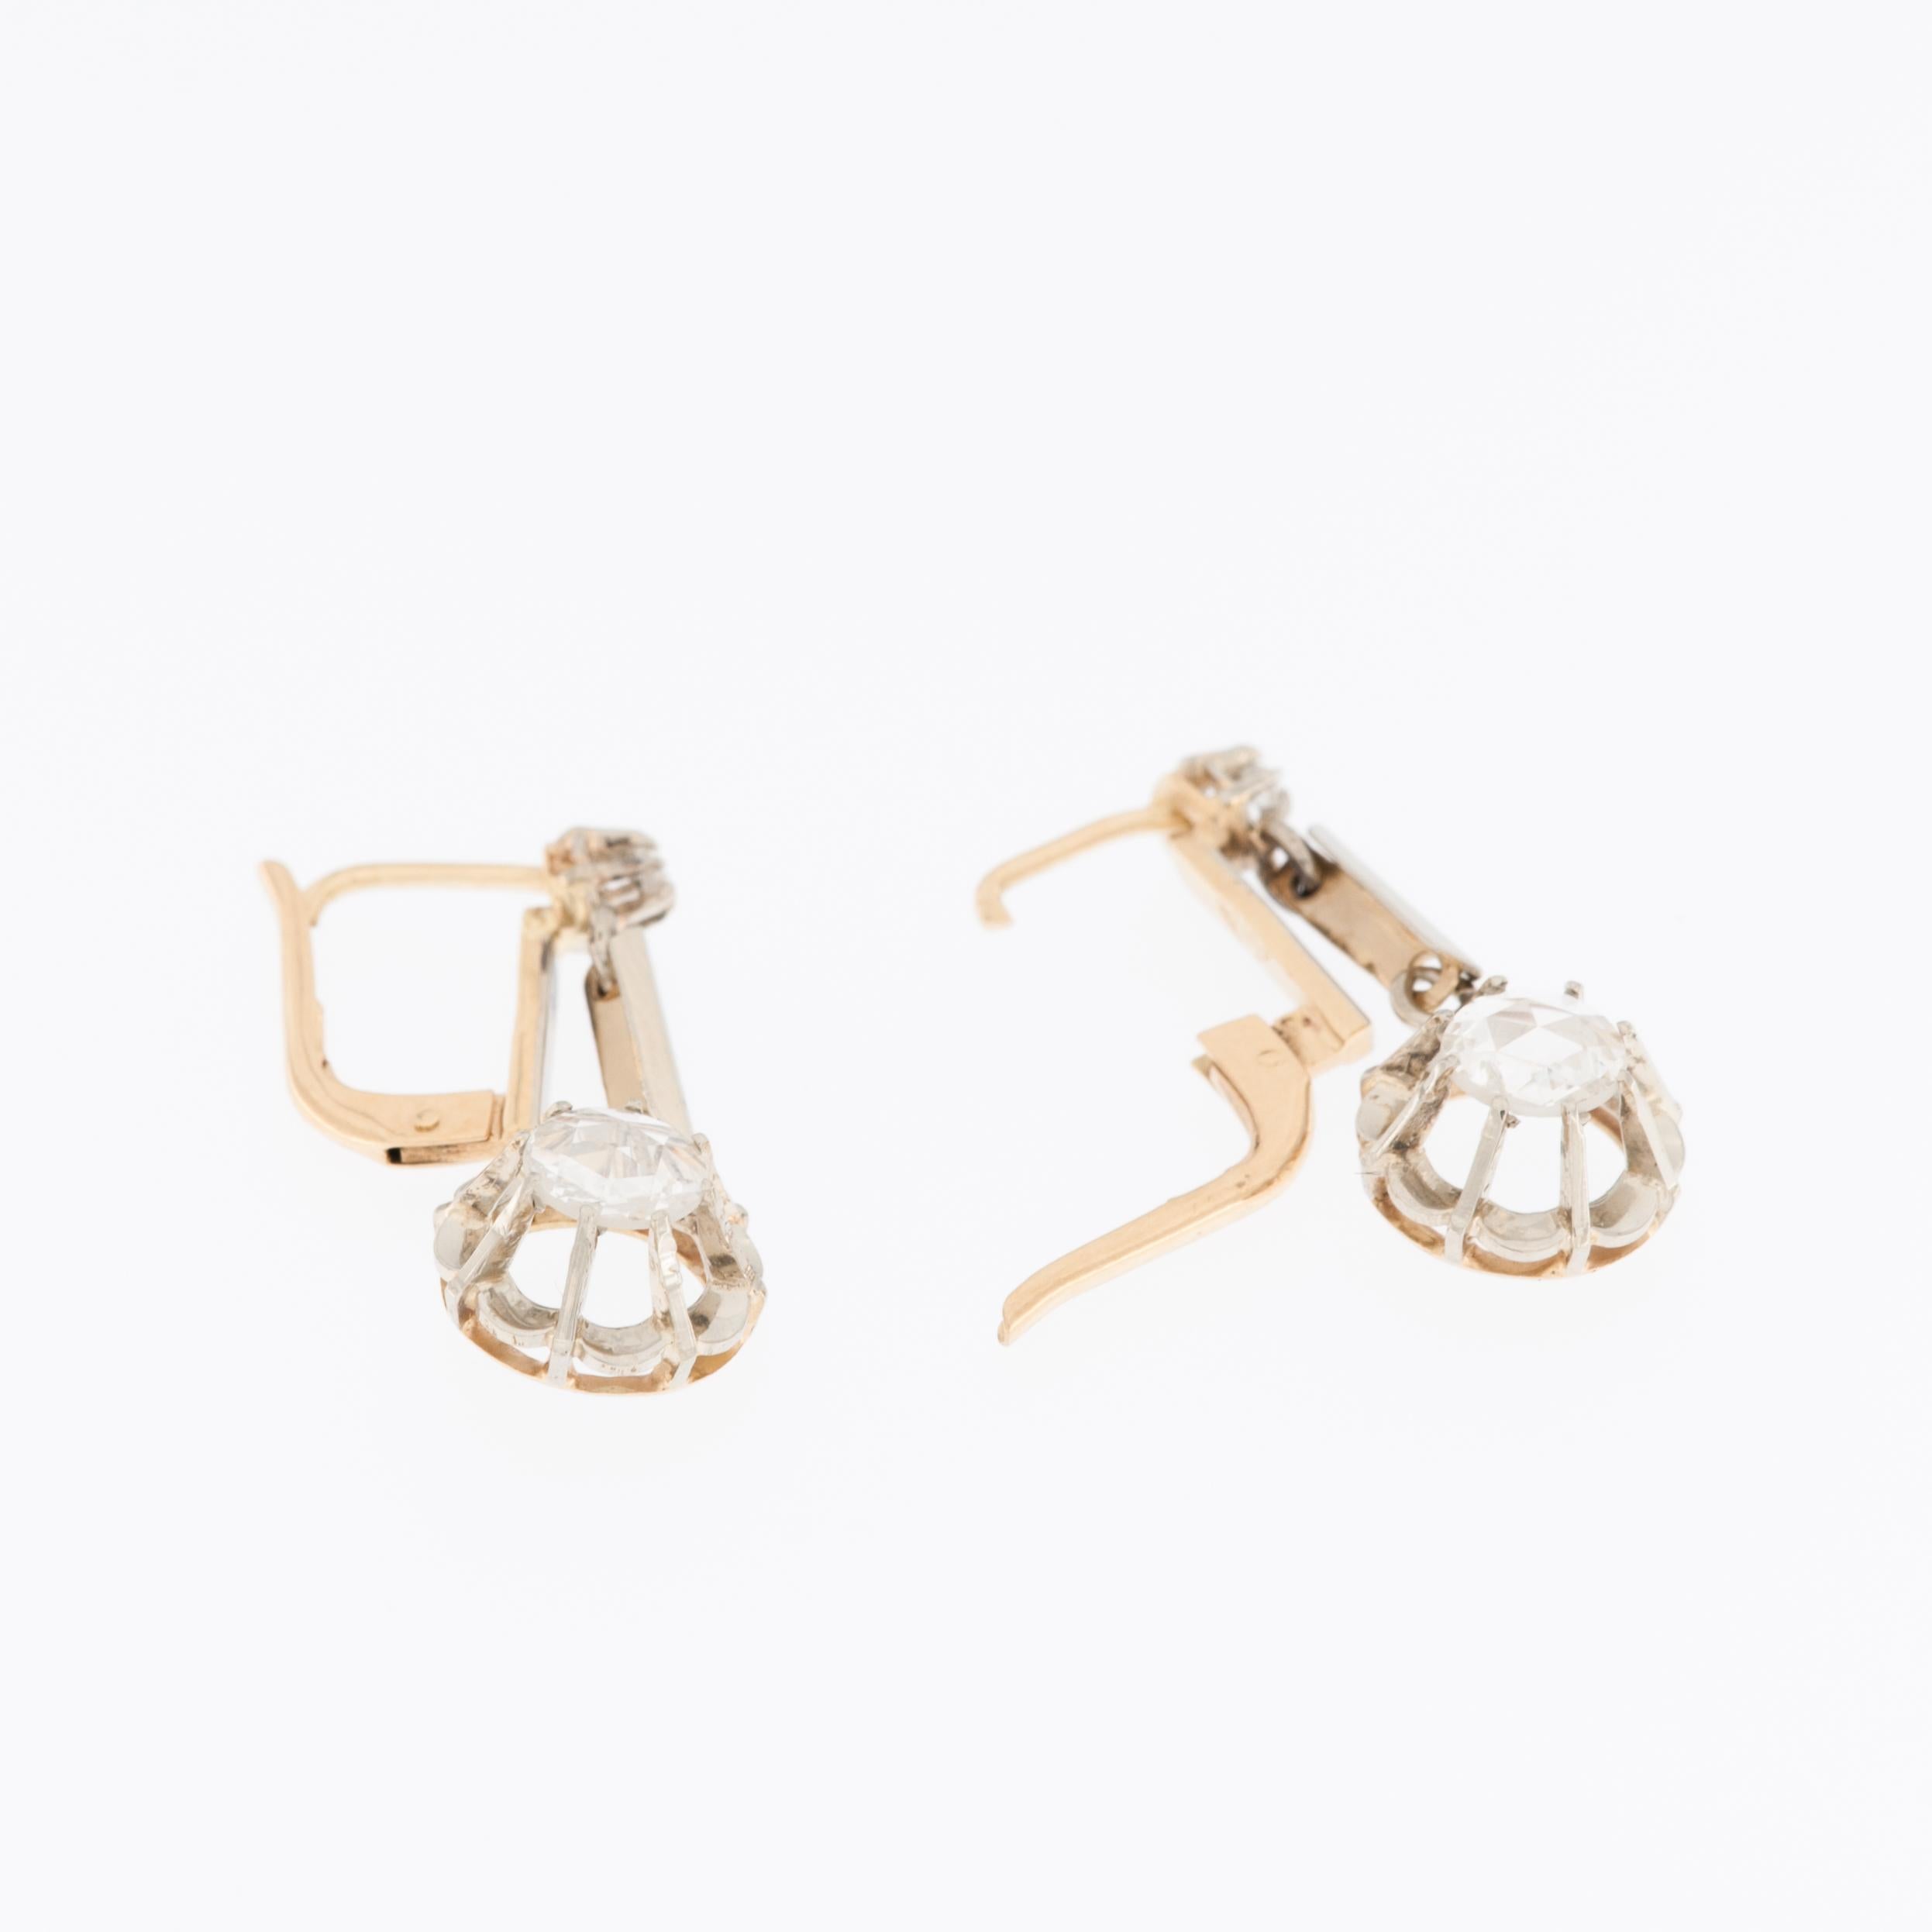 The Mid-Century 18kt Yellow Gold Earrings, are delicately crafted to embody the epitome of timeless elegance. The warm, buttery hue of the 18kt yellow gold sets the stage for a journey through the mid-20th century, capturing the essence of an era